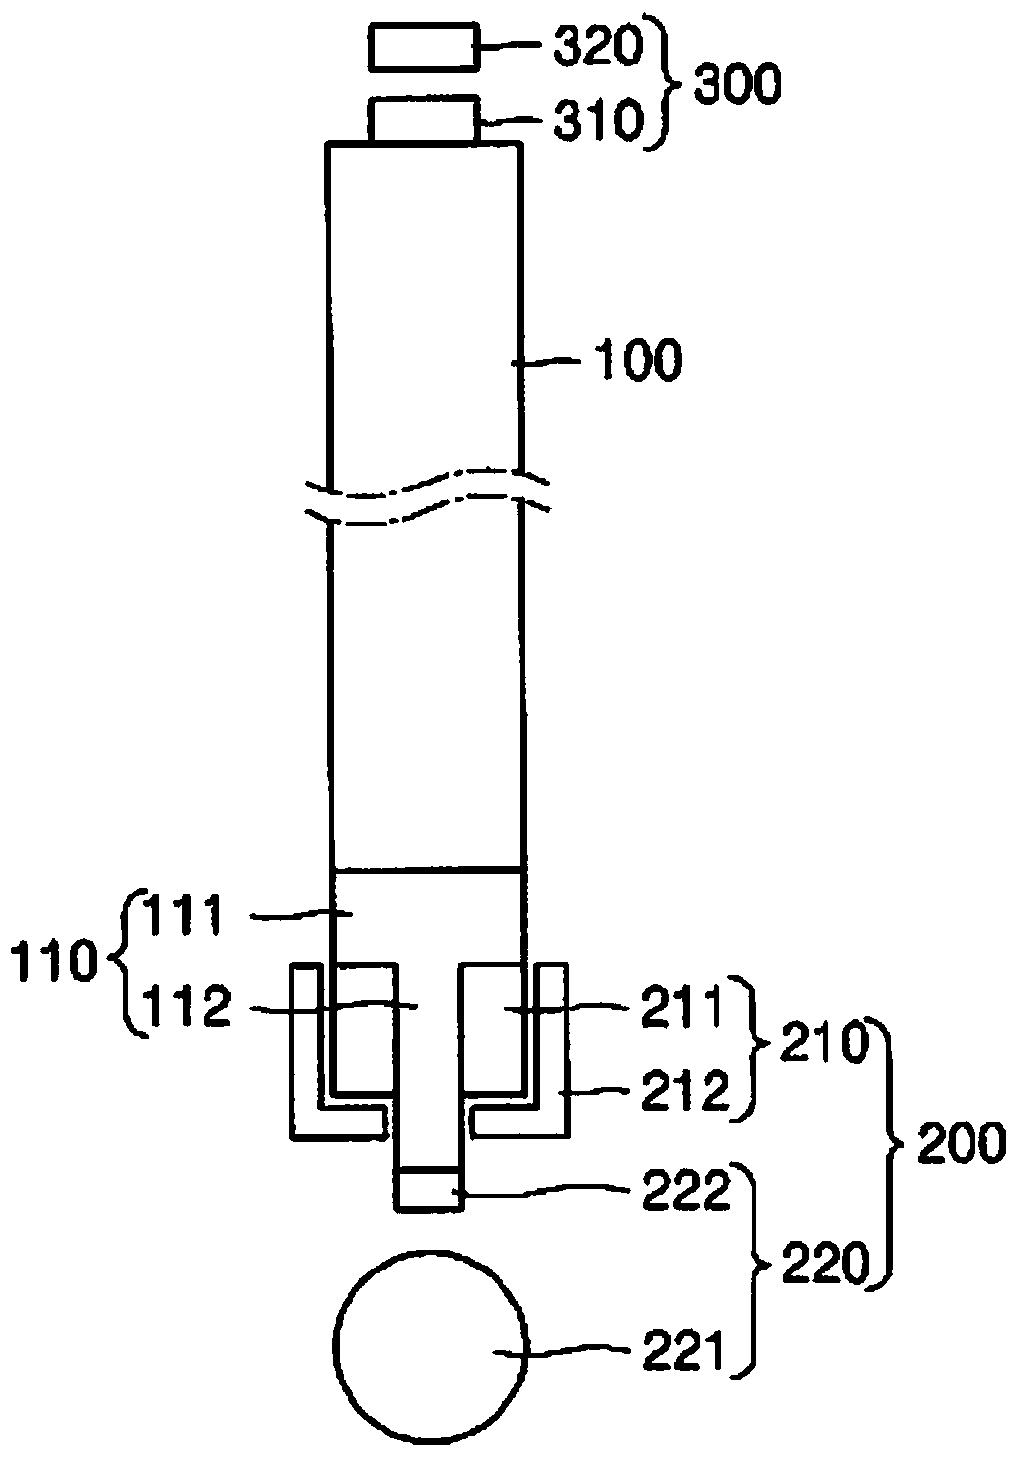 Substrate transfer device